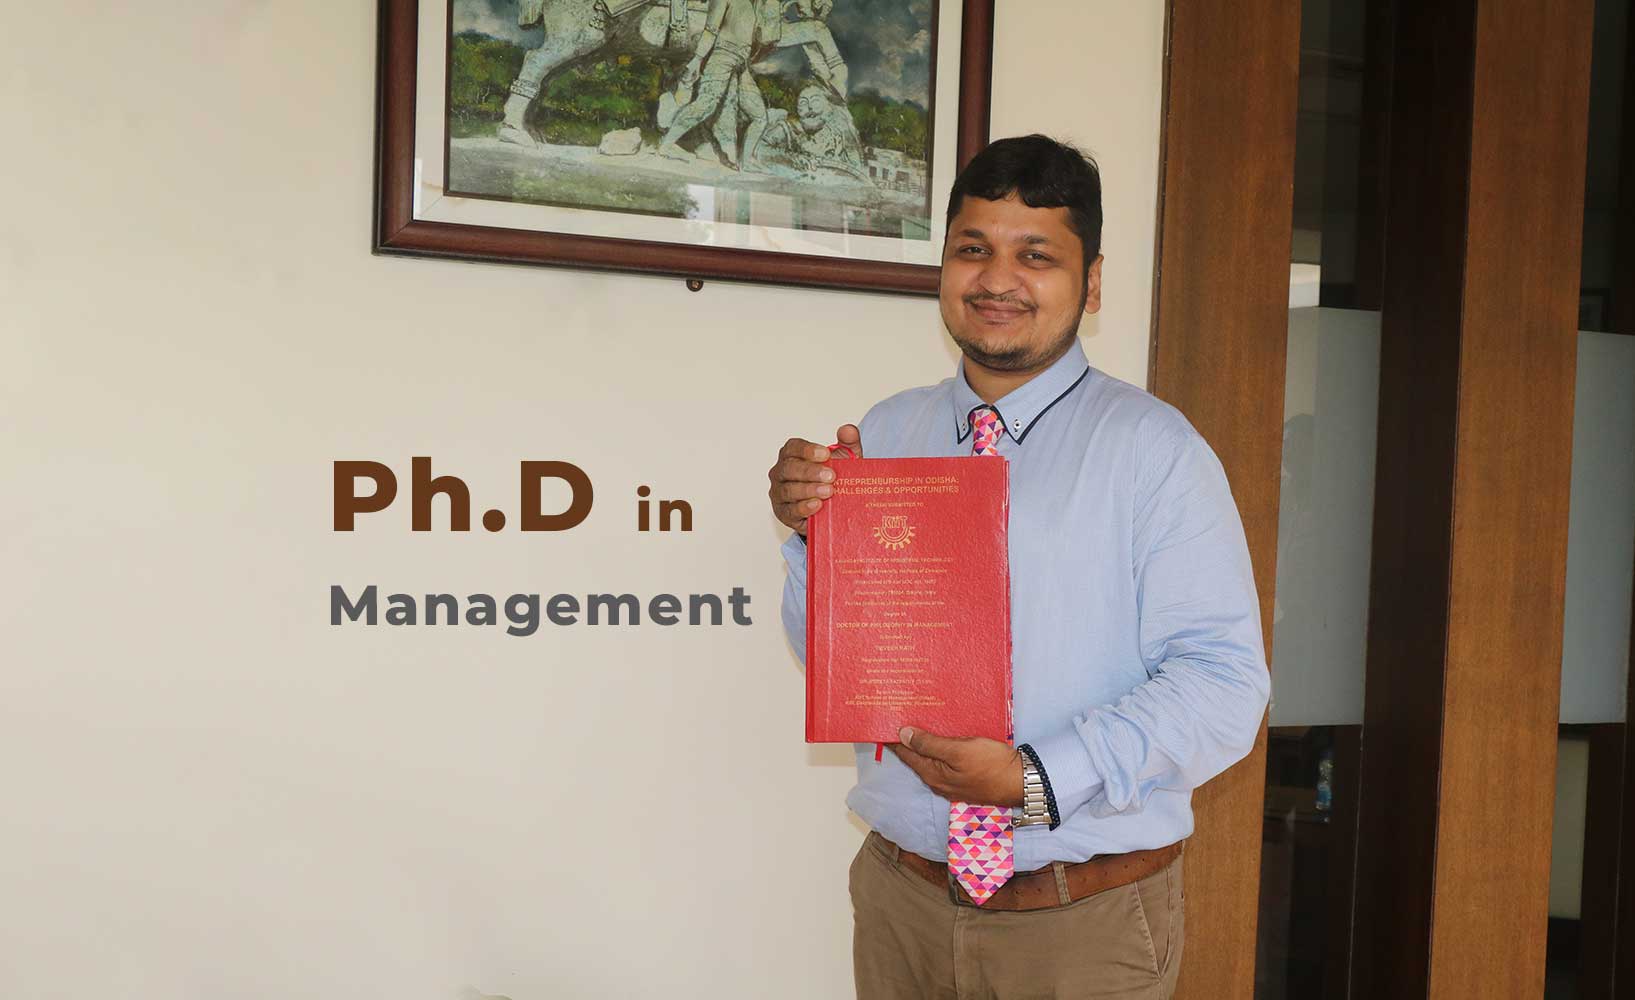 part time phd in business management in india